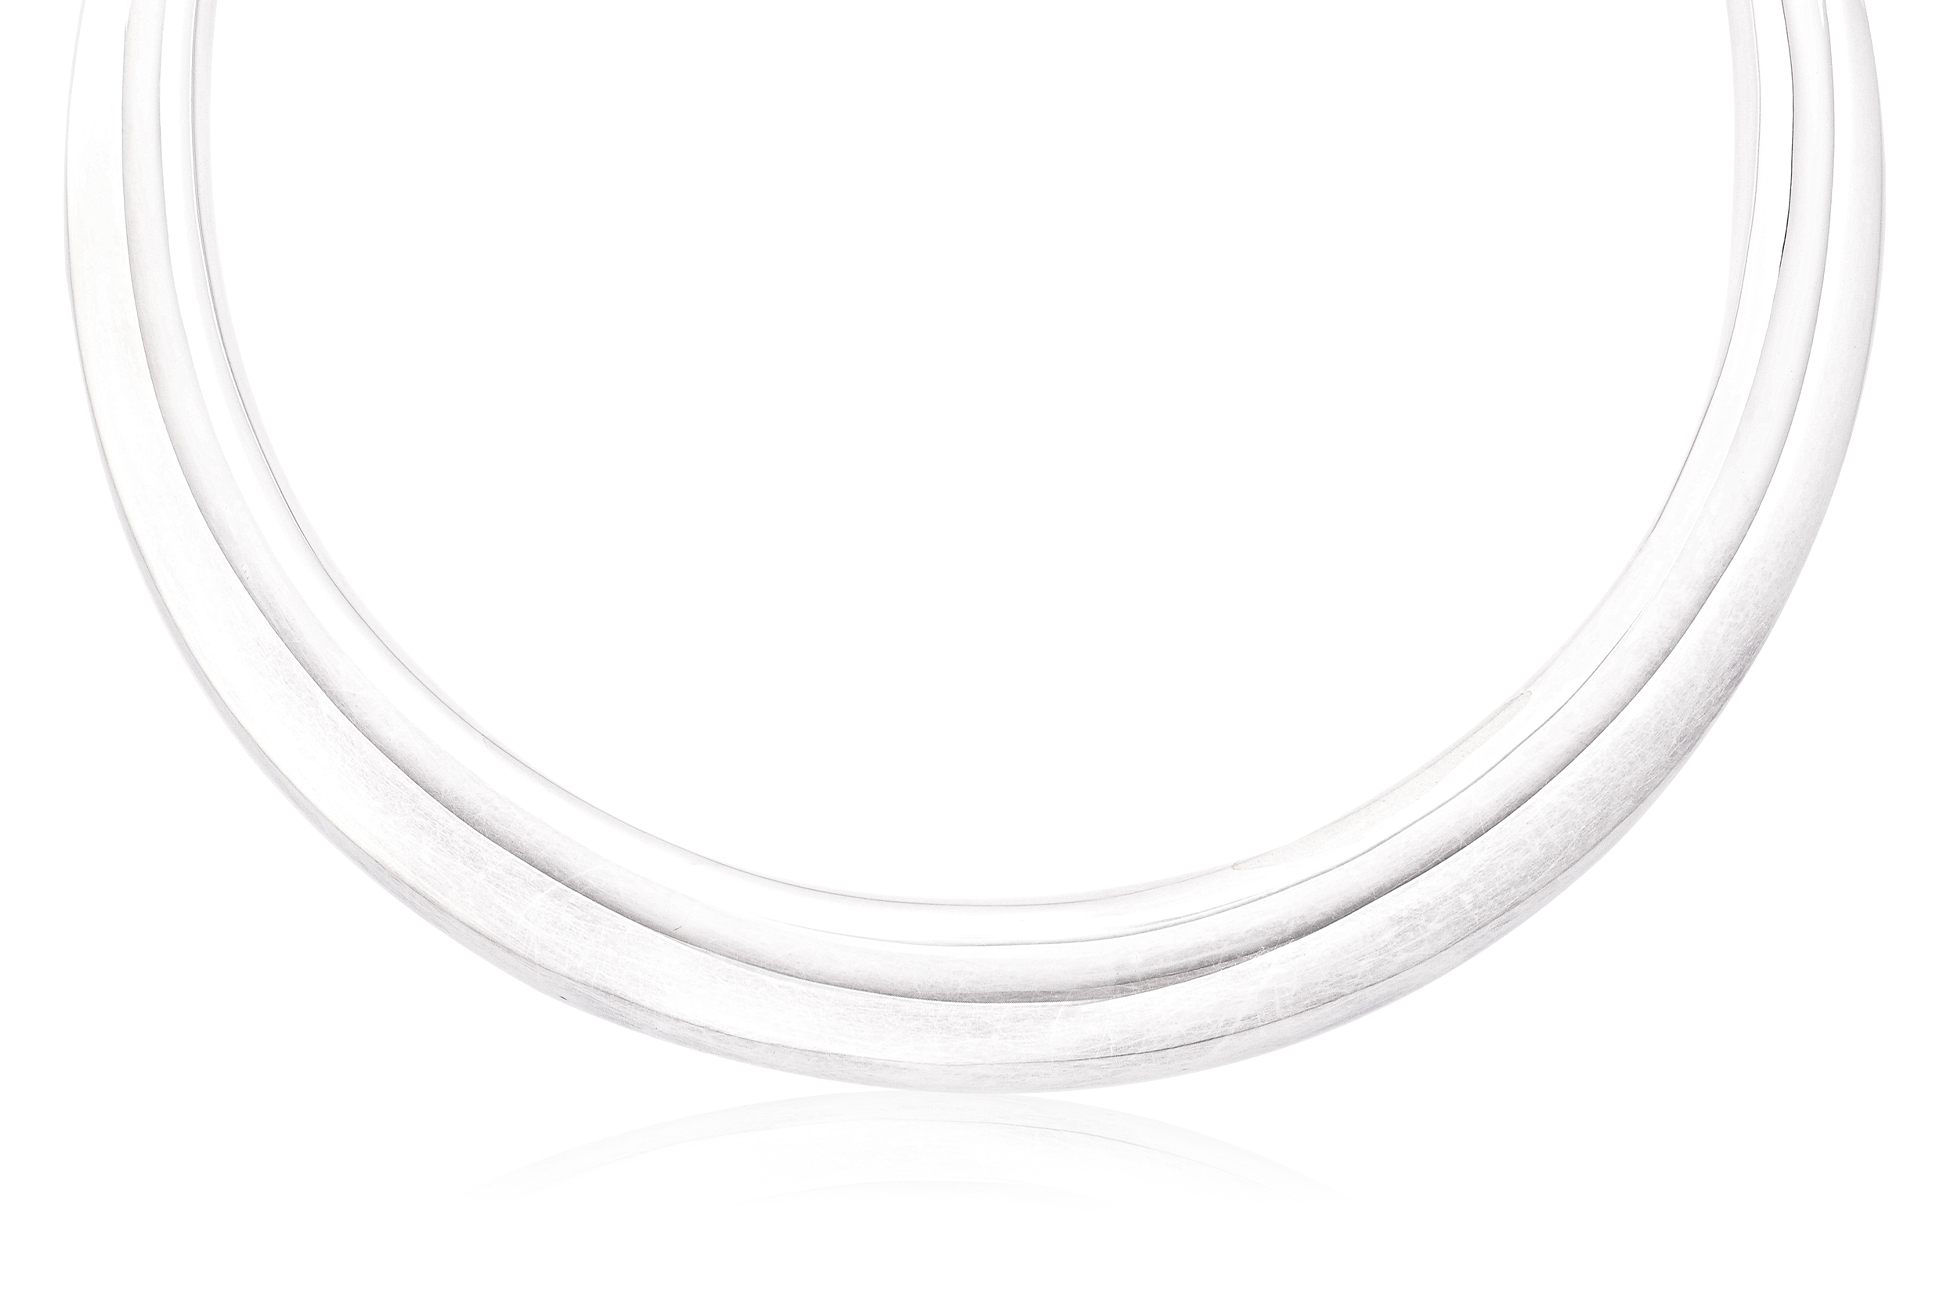 A LARGE SILVER CHOKER BY GEORG JENSEN - Image 2 of 7